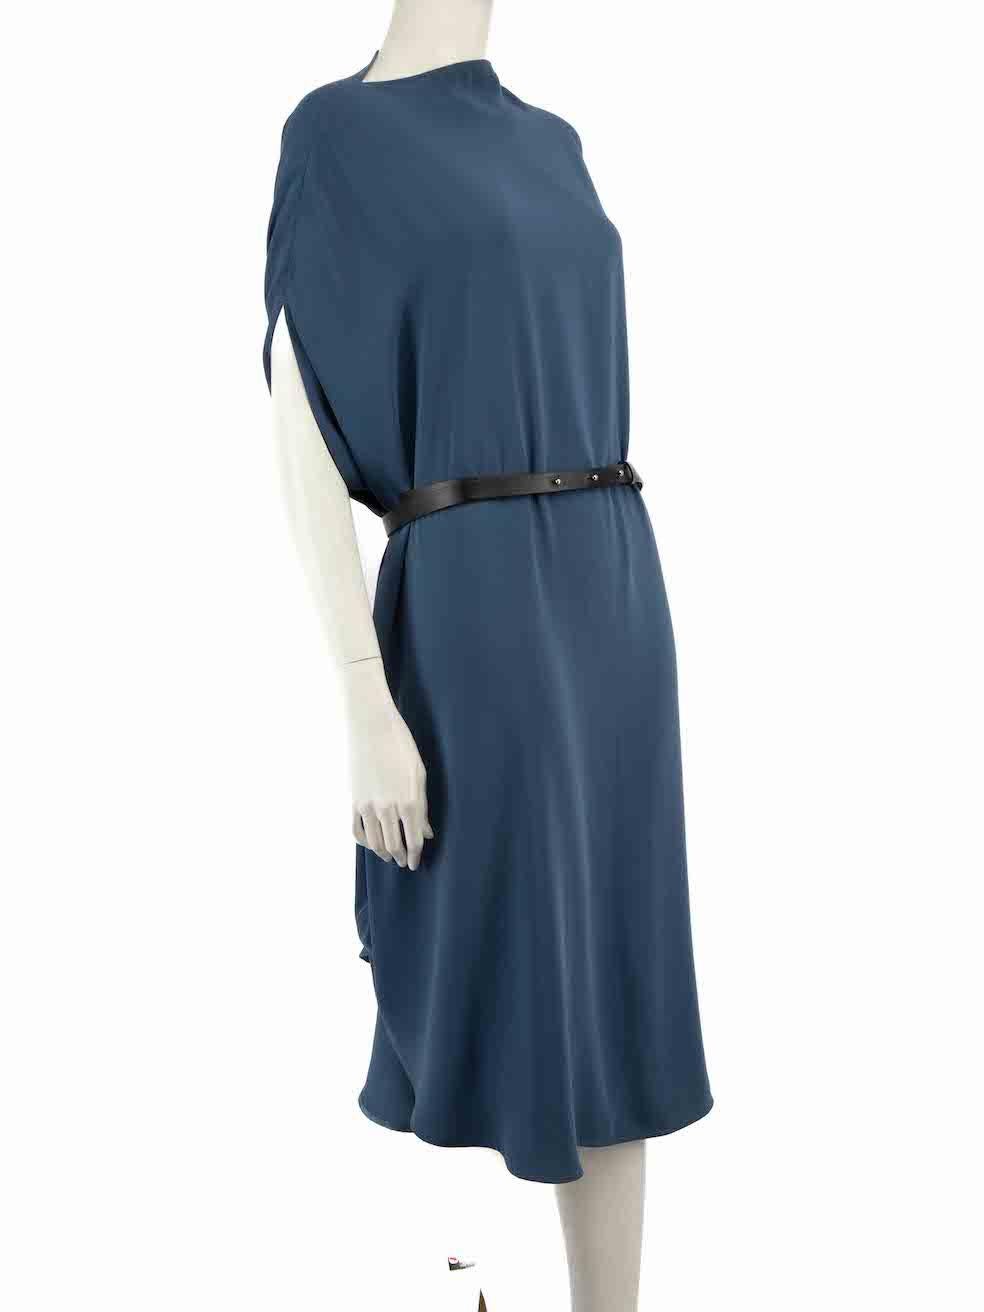 CONDITION is Very good. Minimal wear to dress is evident. Minimal wear to the neckline with minor stain and minor pilling seen on this used MM6 Maison Margiela designer resale item. This item comes with belt.
 
 
 
 Details
 
 
 Blue
 
 Polyester
 
